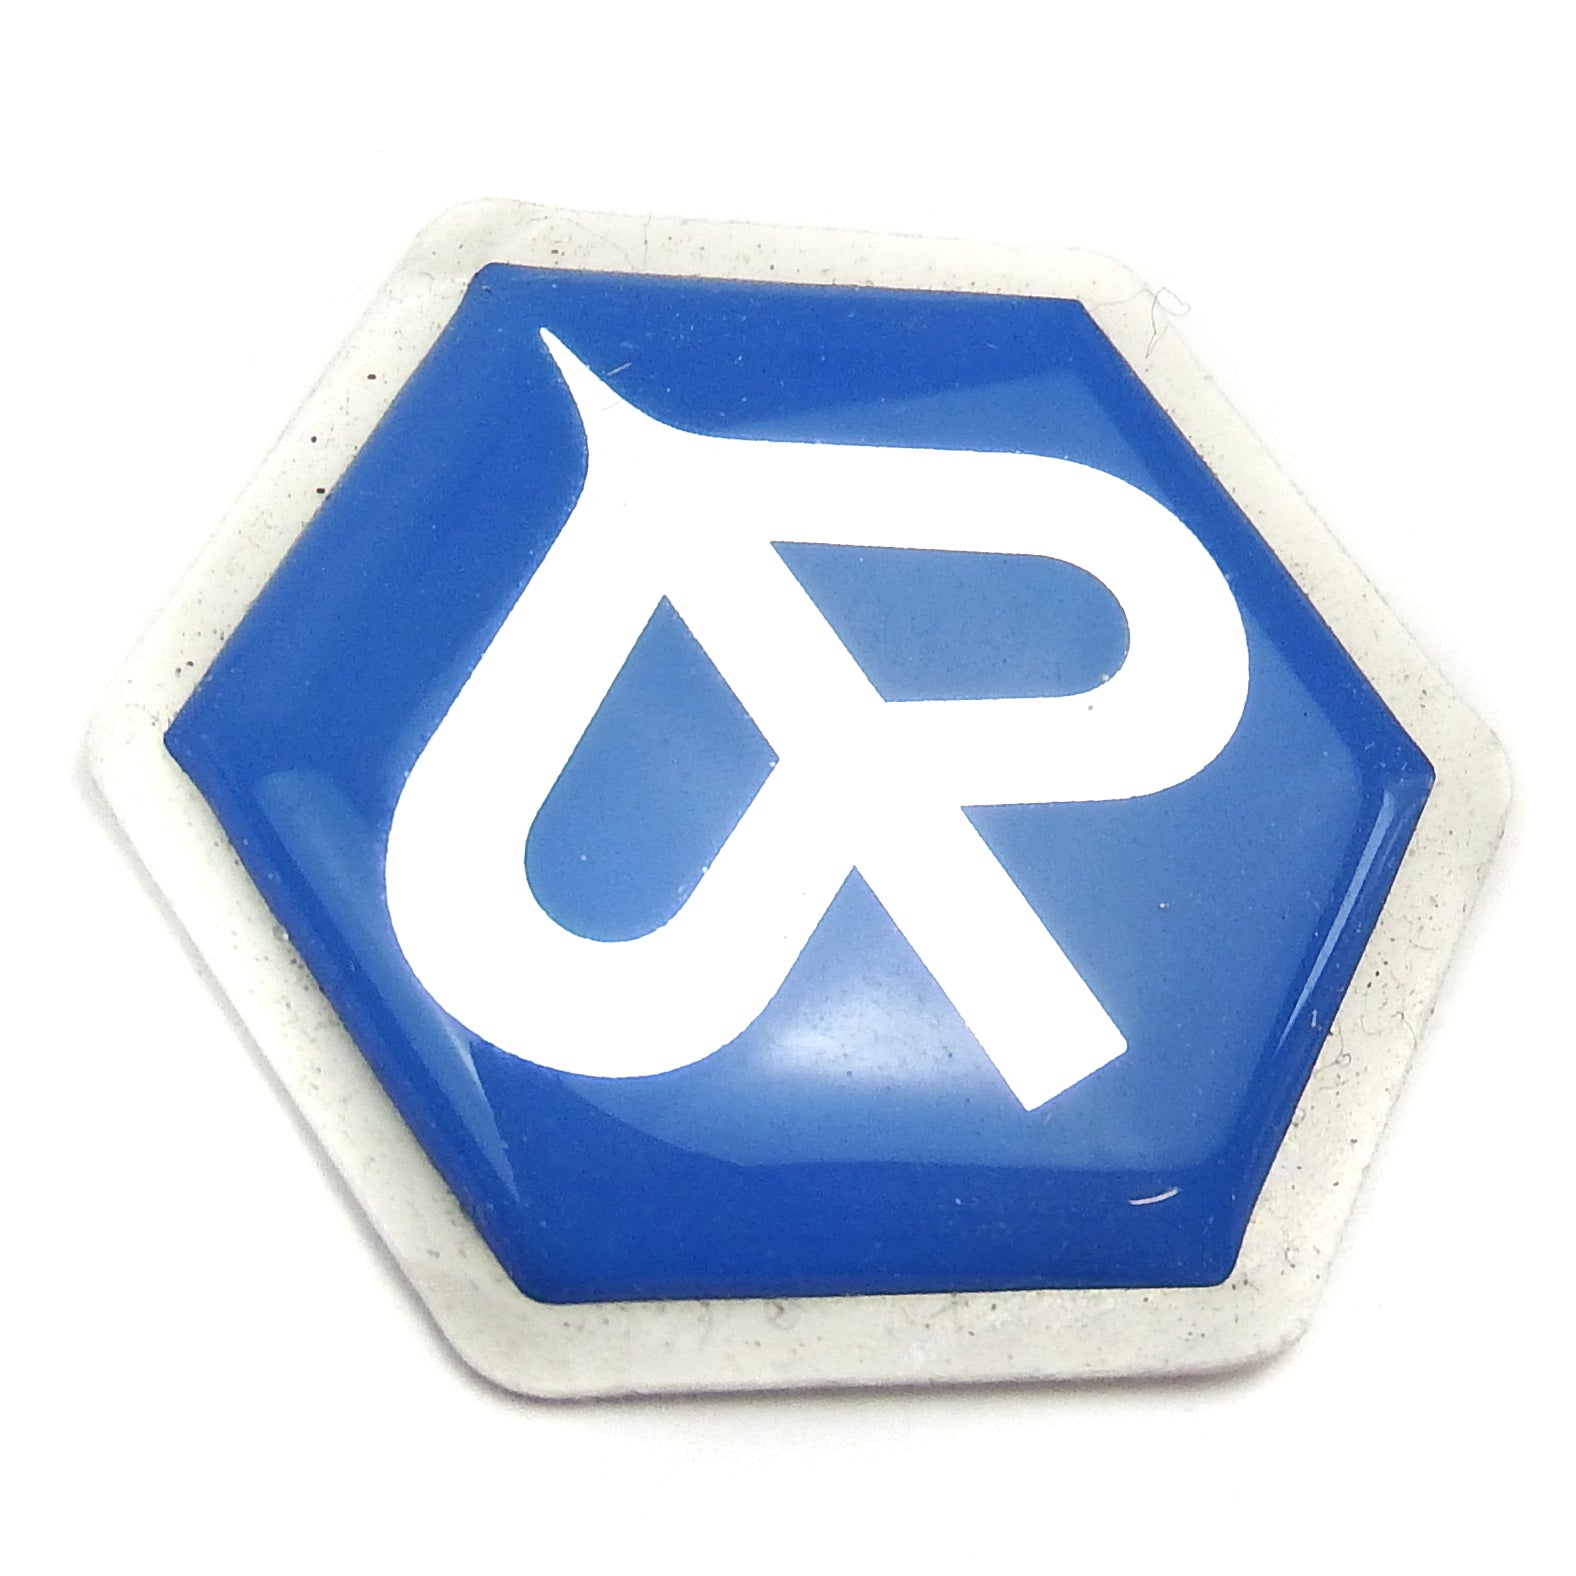 Vespa Piaggio Horncover Badge Hexagon Shaped - Smooth Resin 27mm